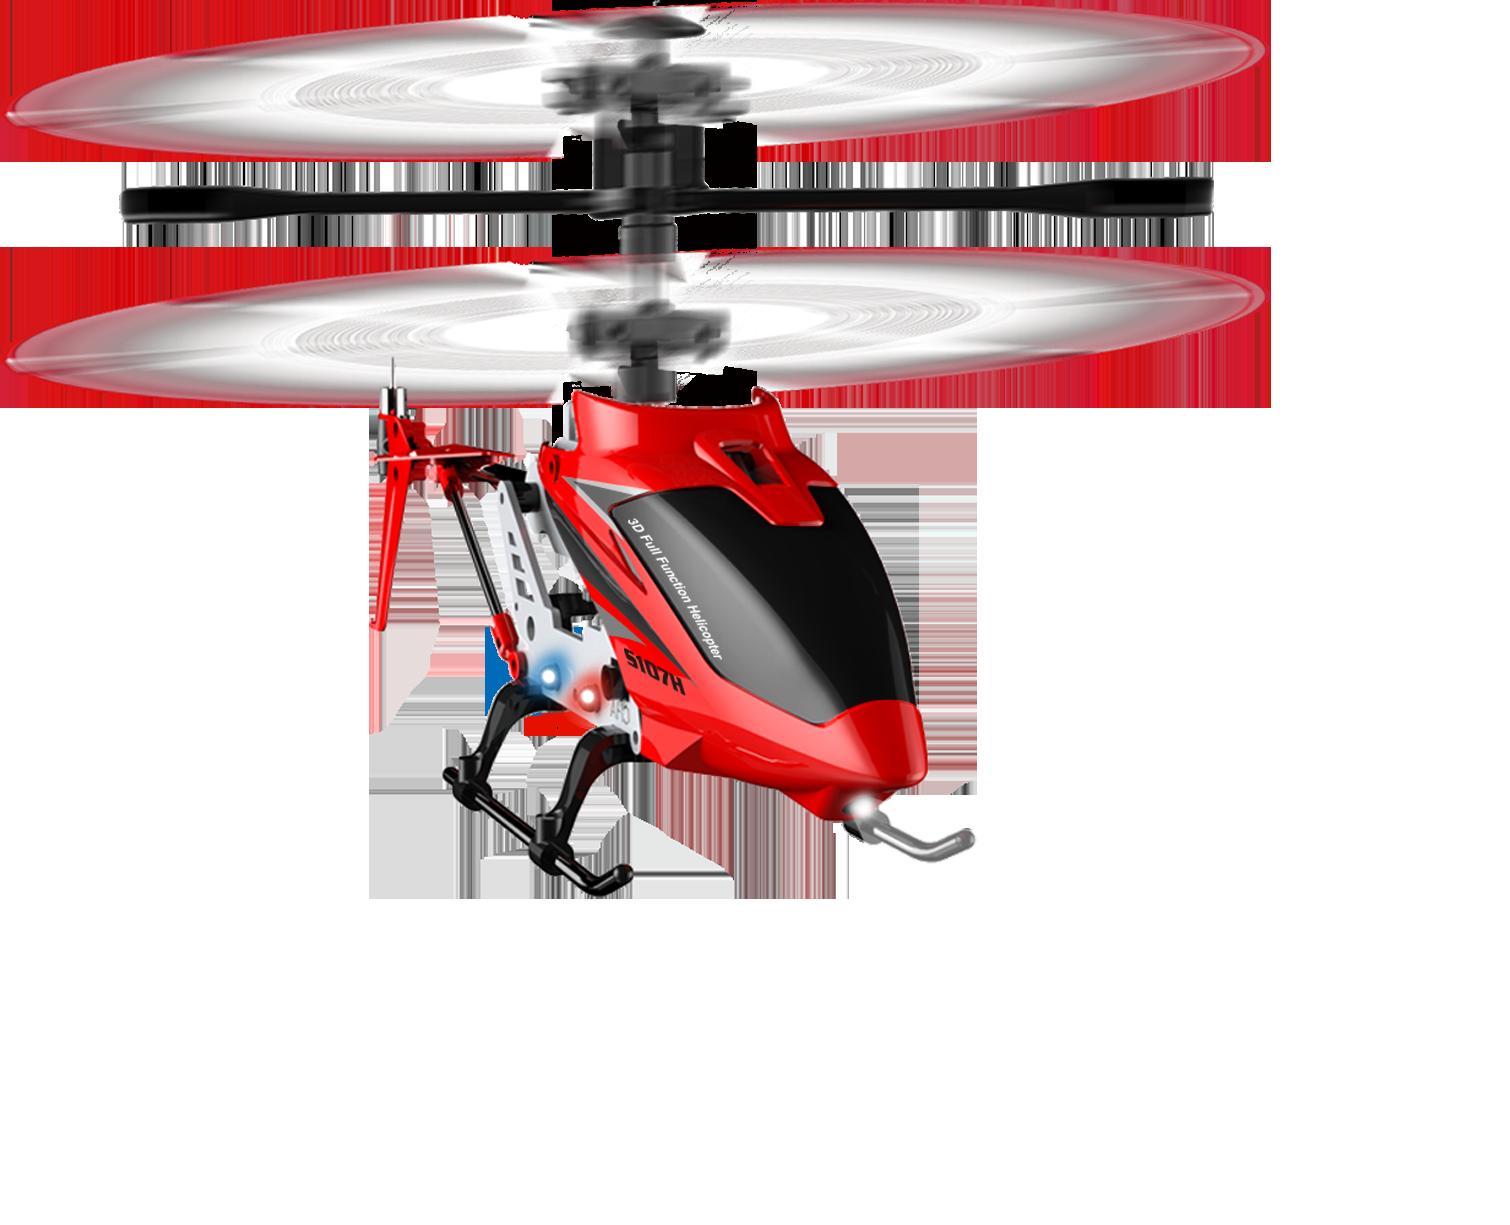 Remote Control Helicopter Below 400: Factors Affecting the Price of Remote Control Helicopters Below 400: Technology, Build Quality, and Materials